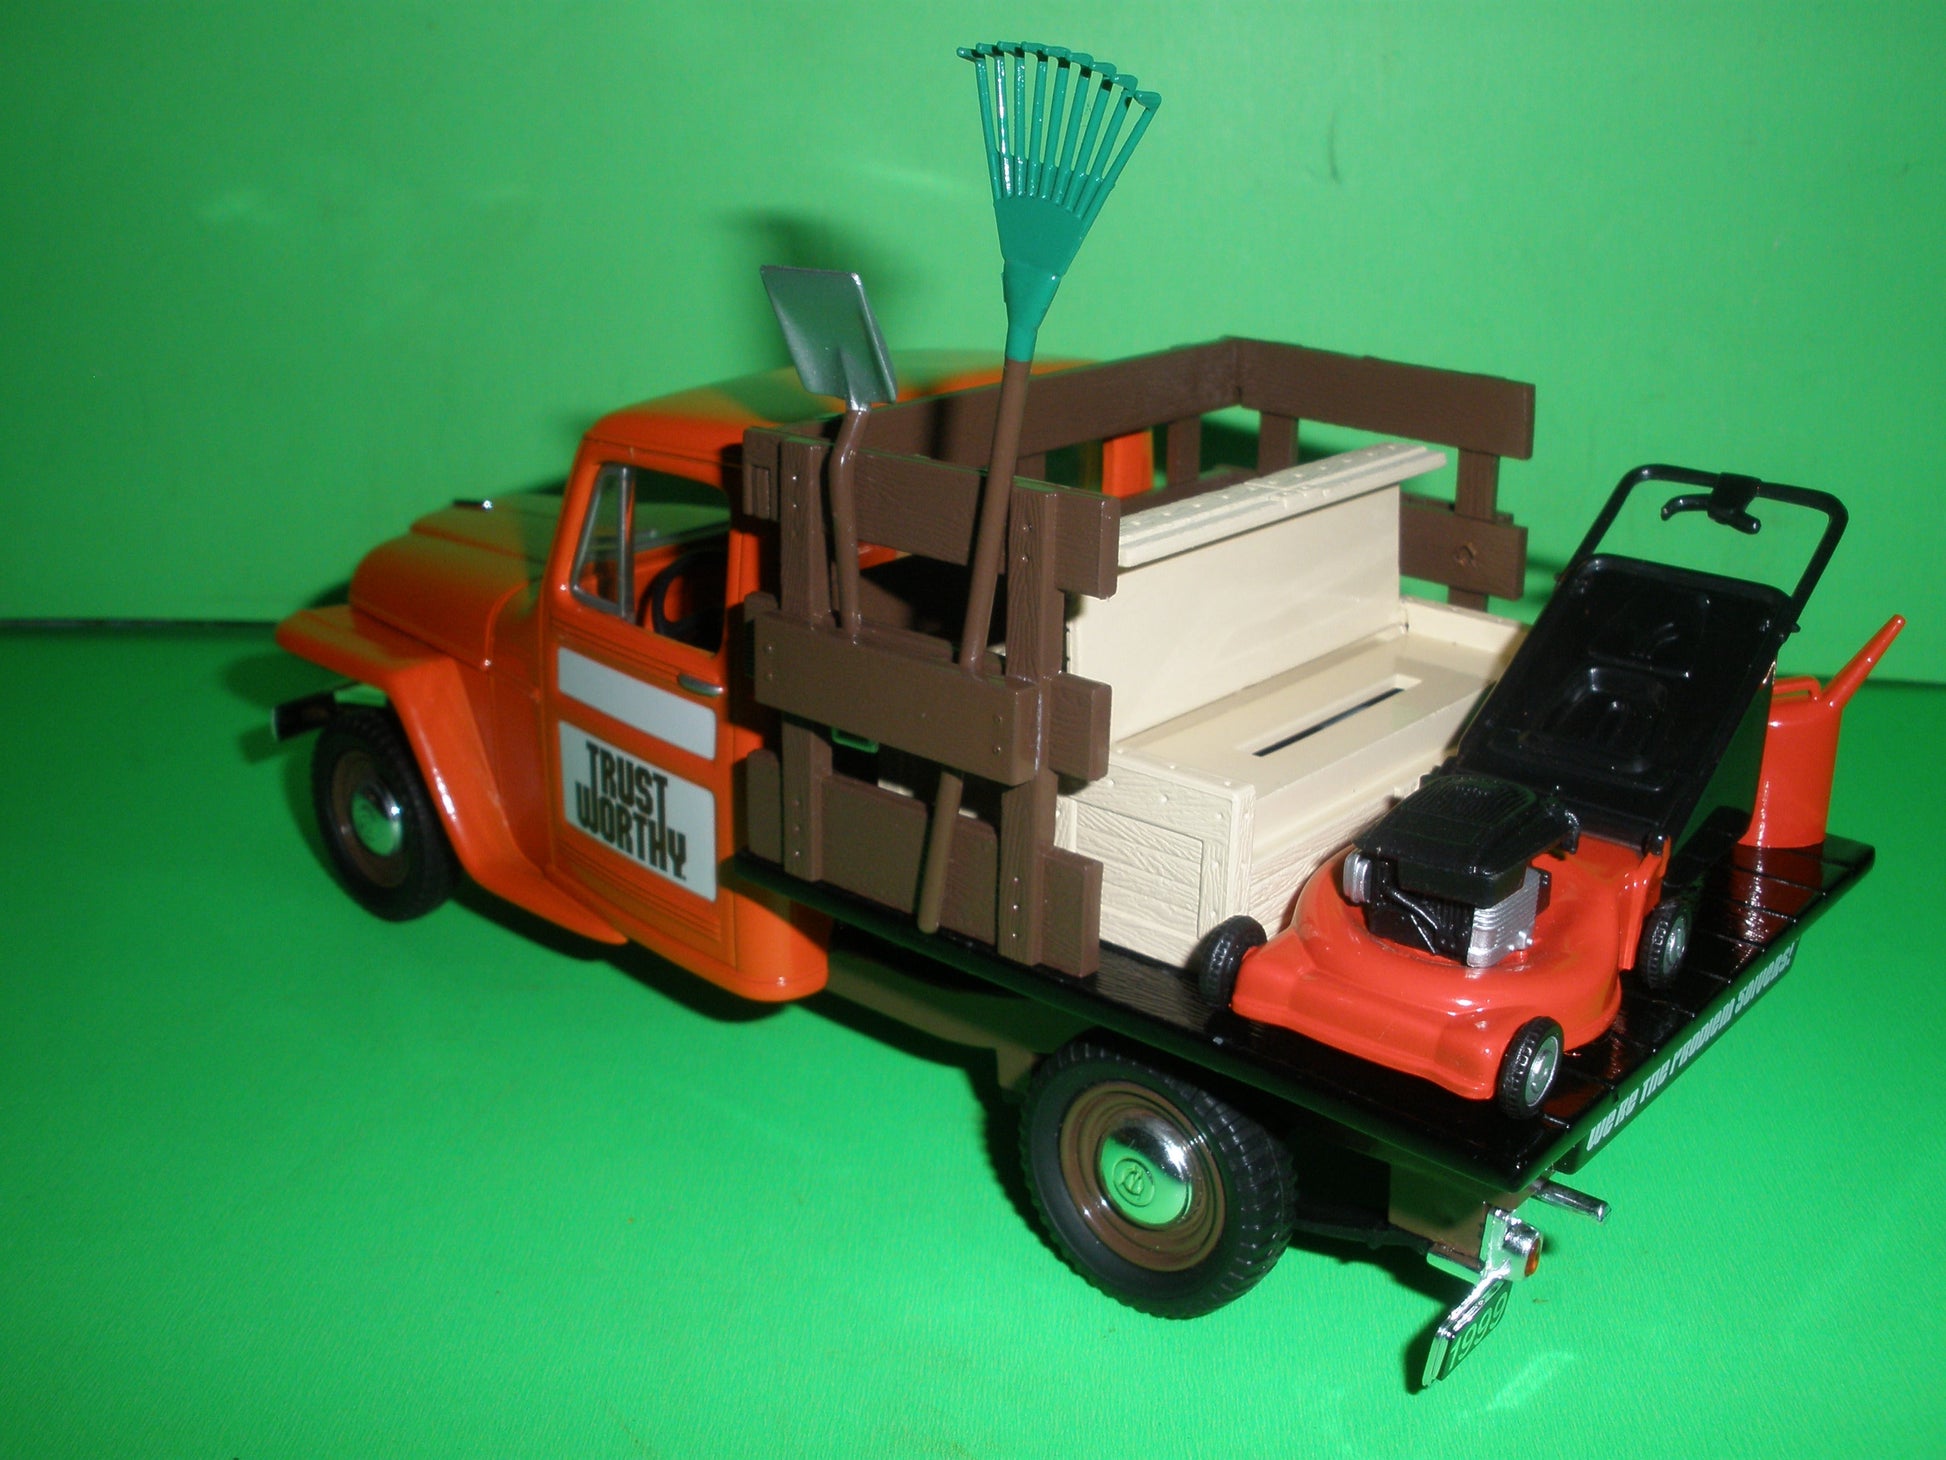 Trustworthy Hardware Stores 1953 Willys Jeep Stake Bed Truck